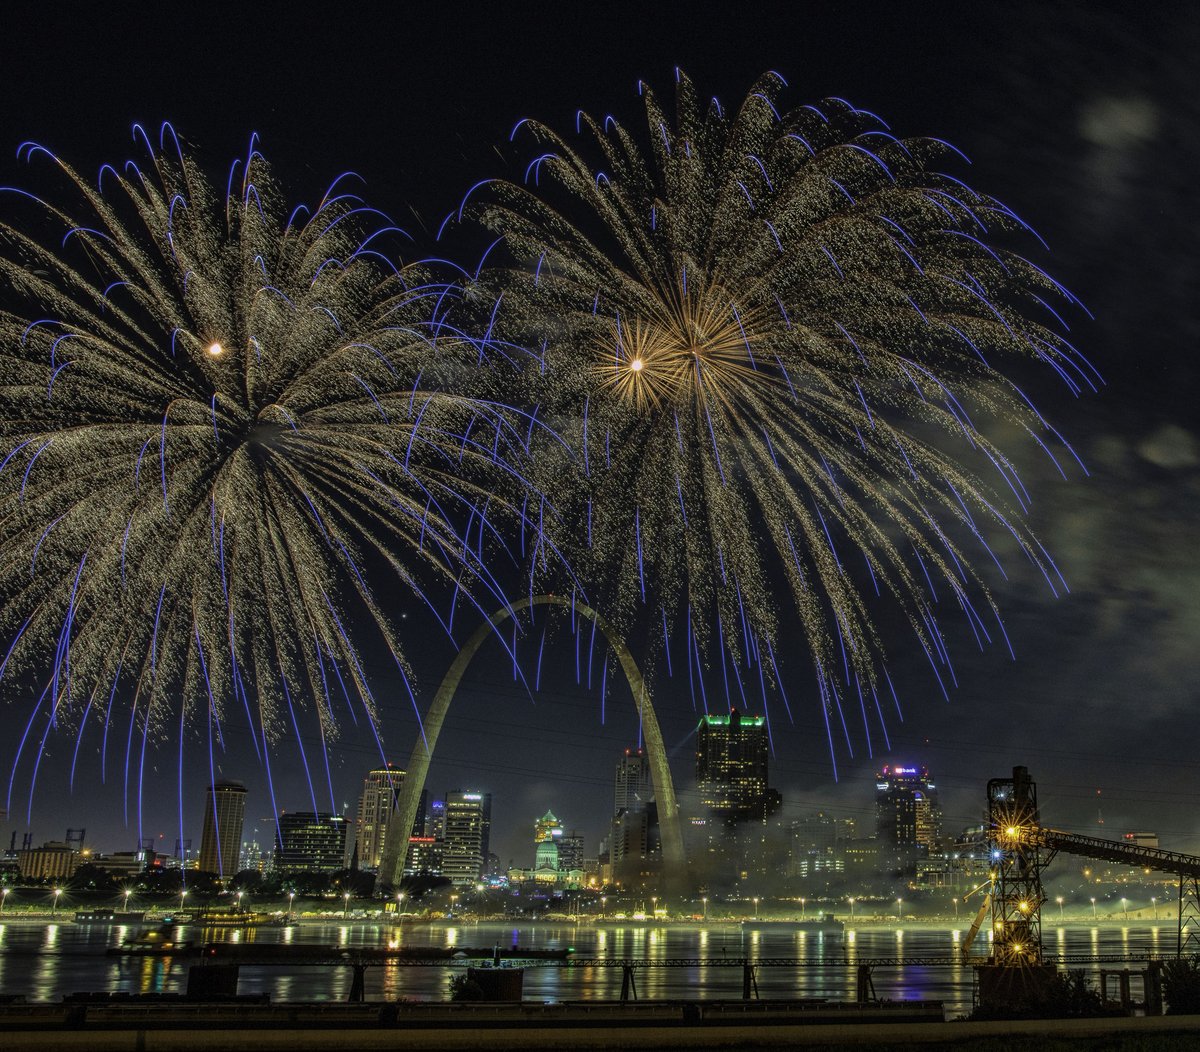 #StLouis Looking forward to a safe 4th!